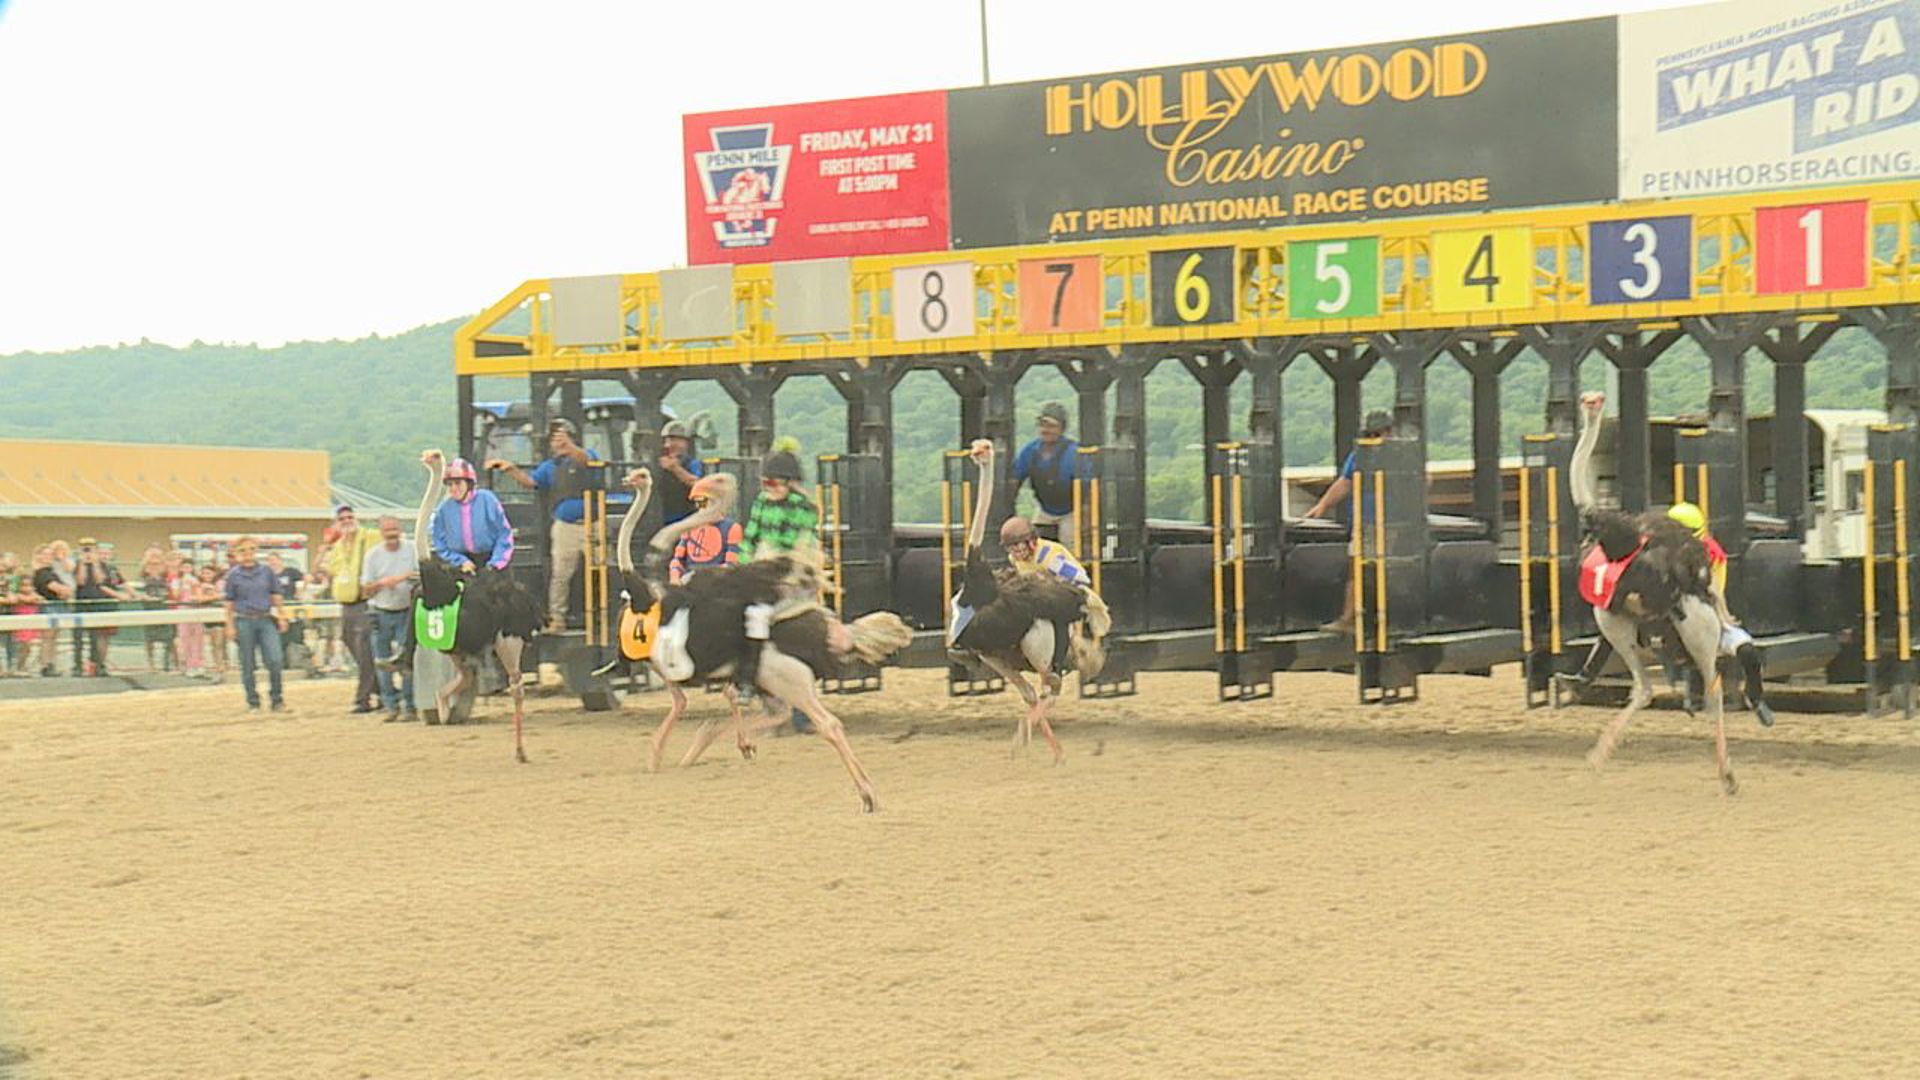 Ostrich, camel and zebra races were held at Penn National Race Course in an effort to spark interest in horse racing.